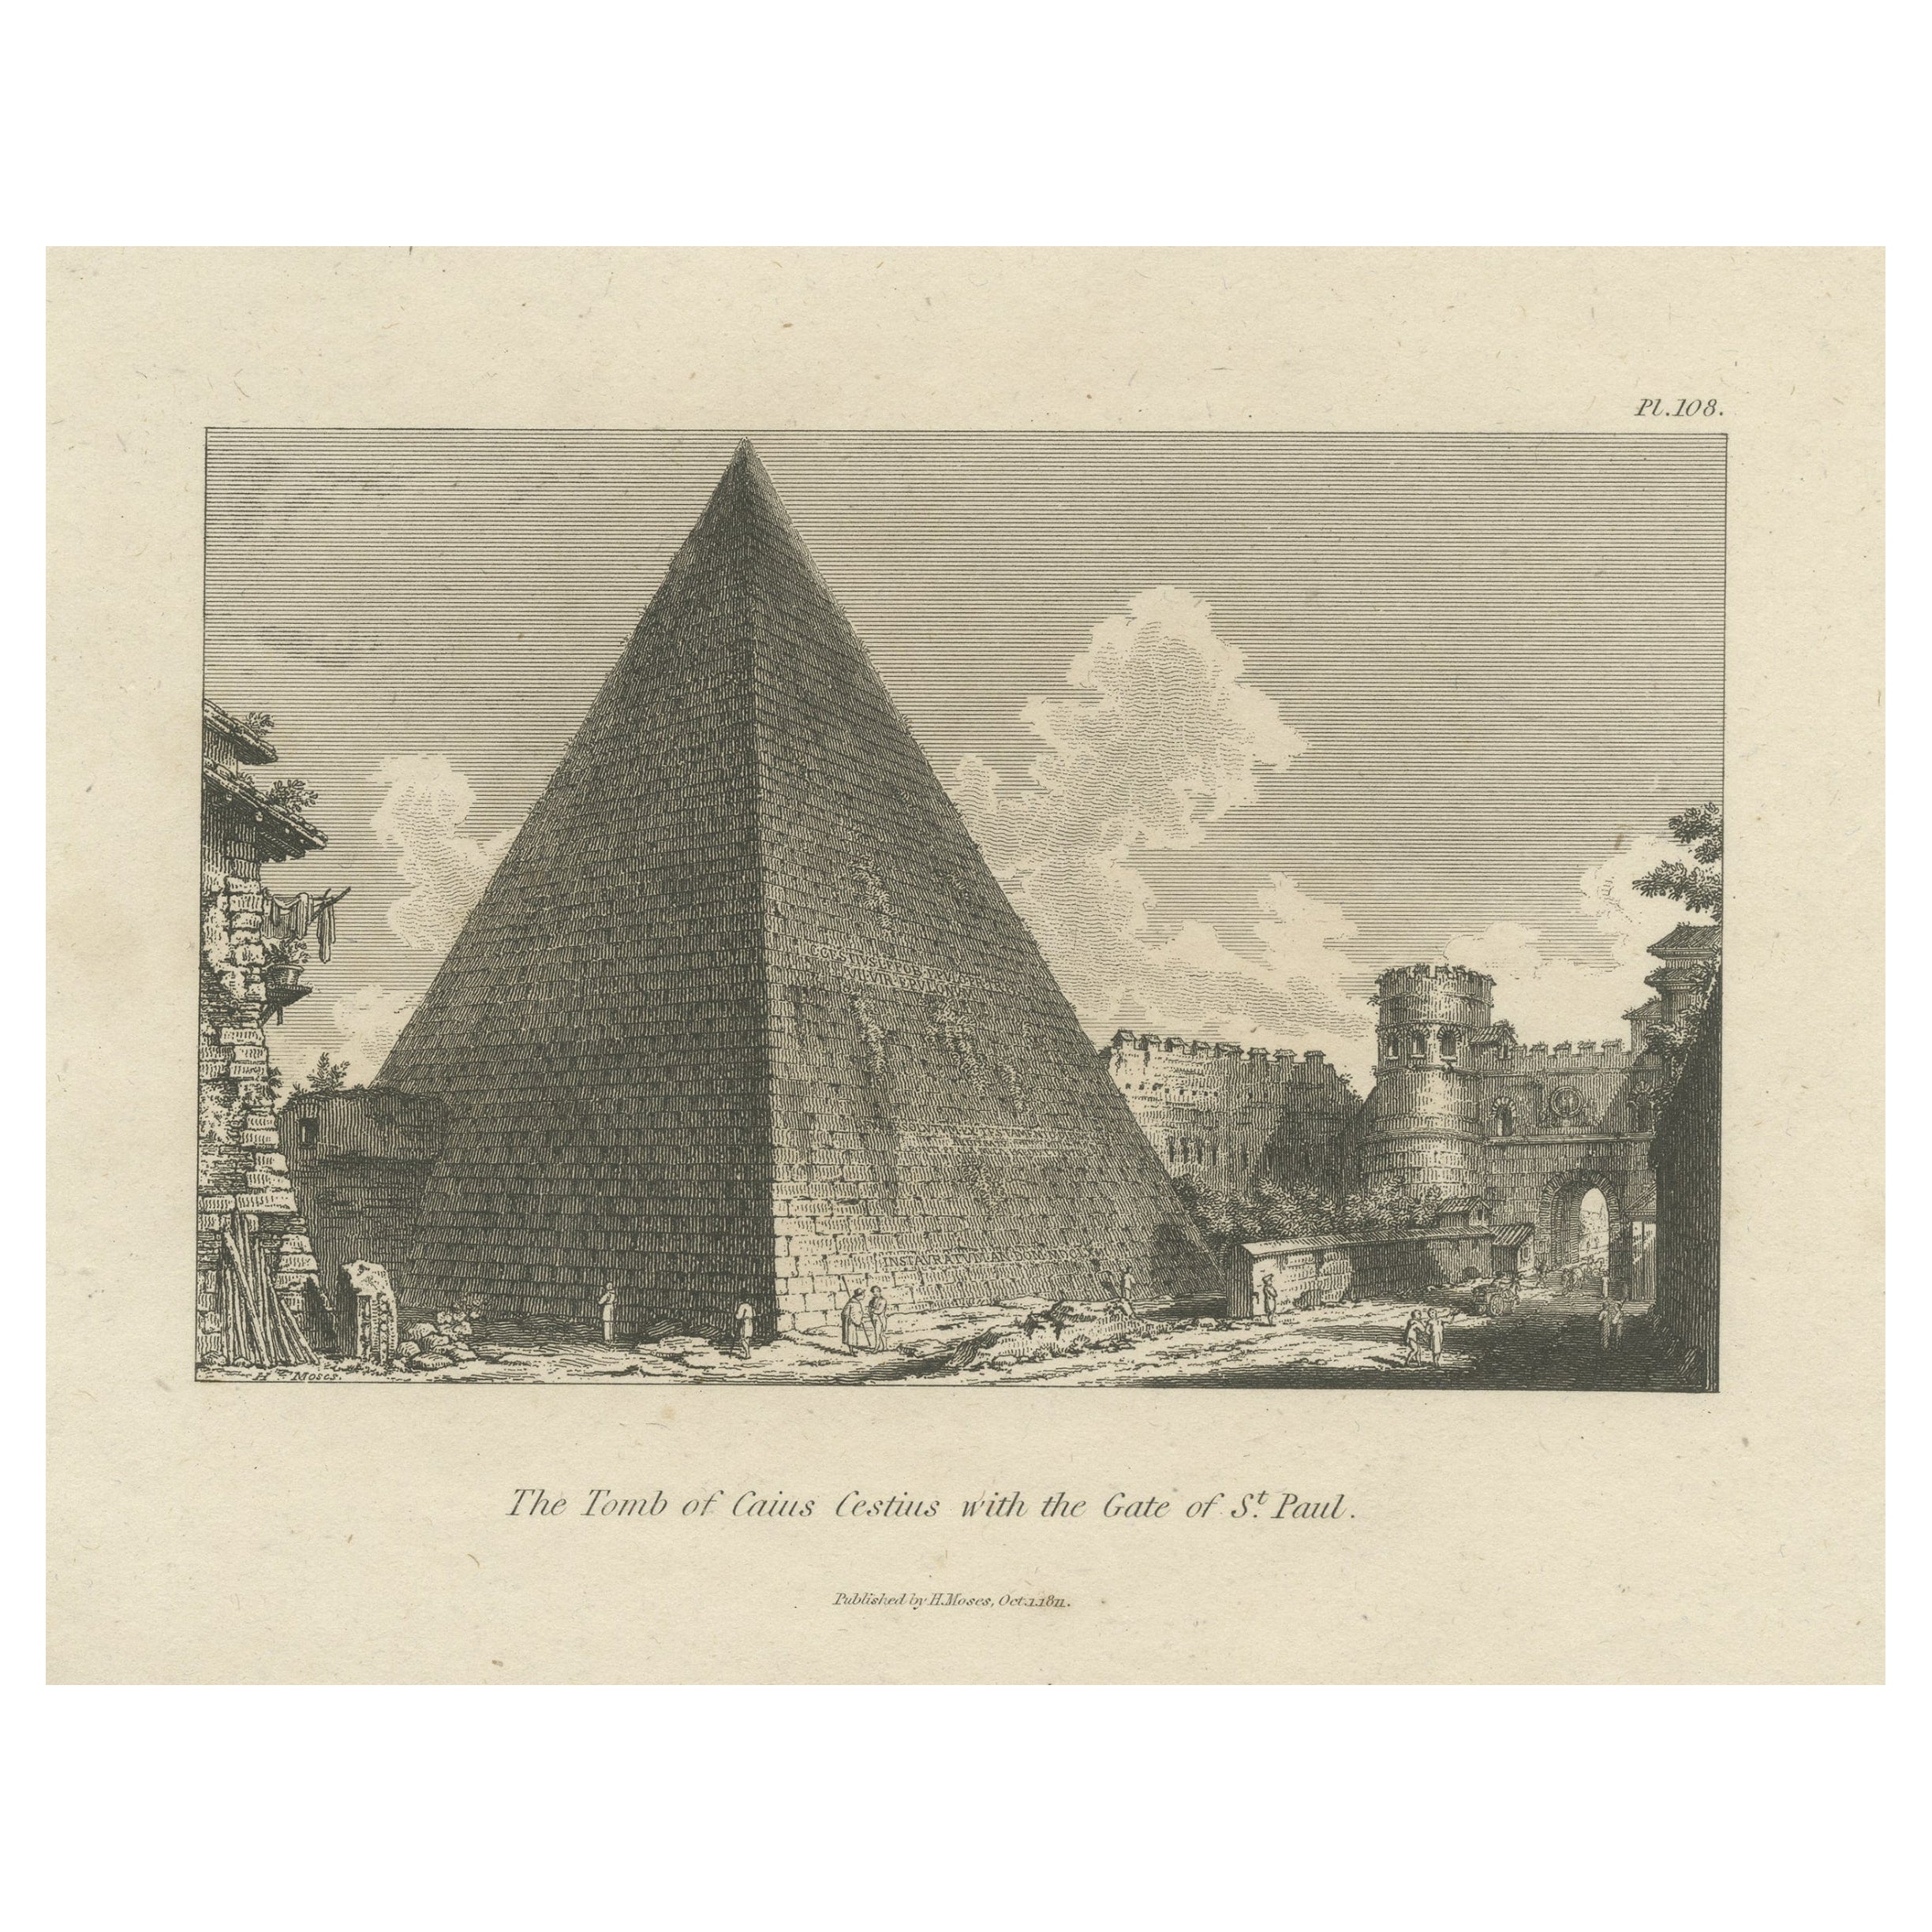 Antique Print of the Pyramid of Cestius in Rome, Italy, 1814